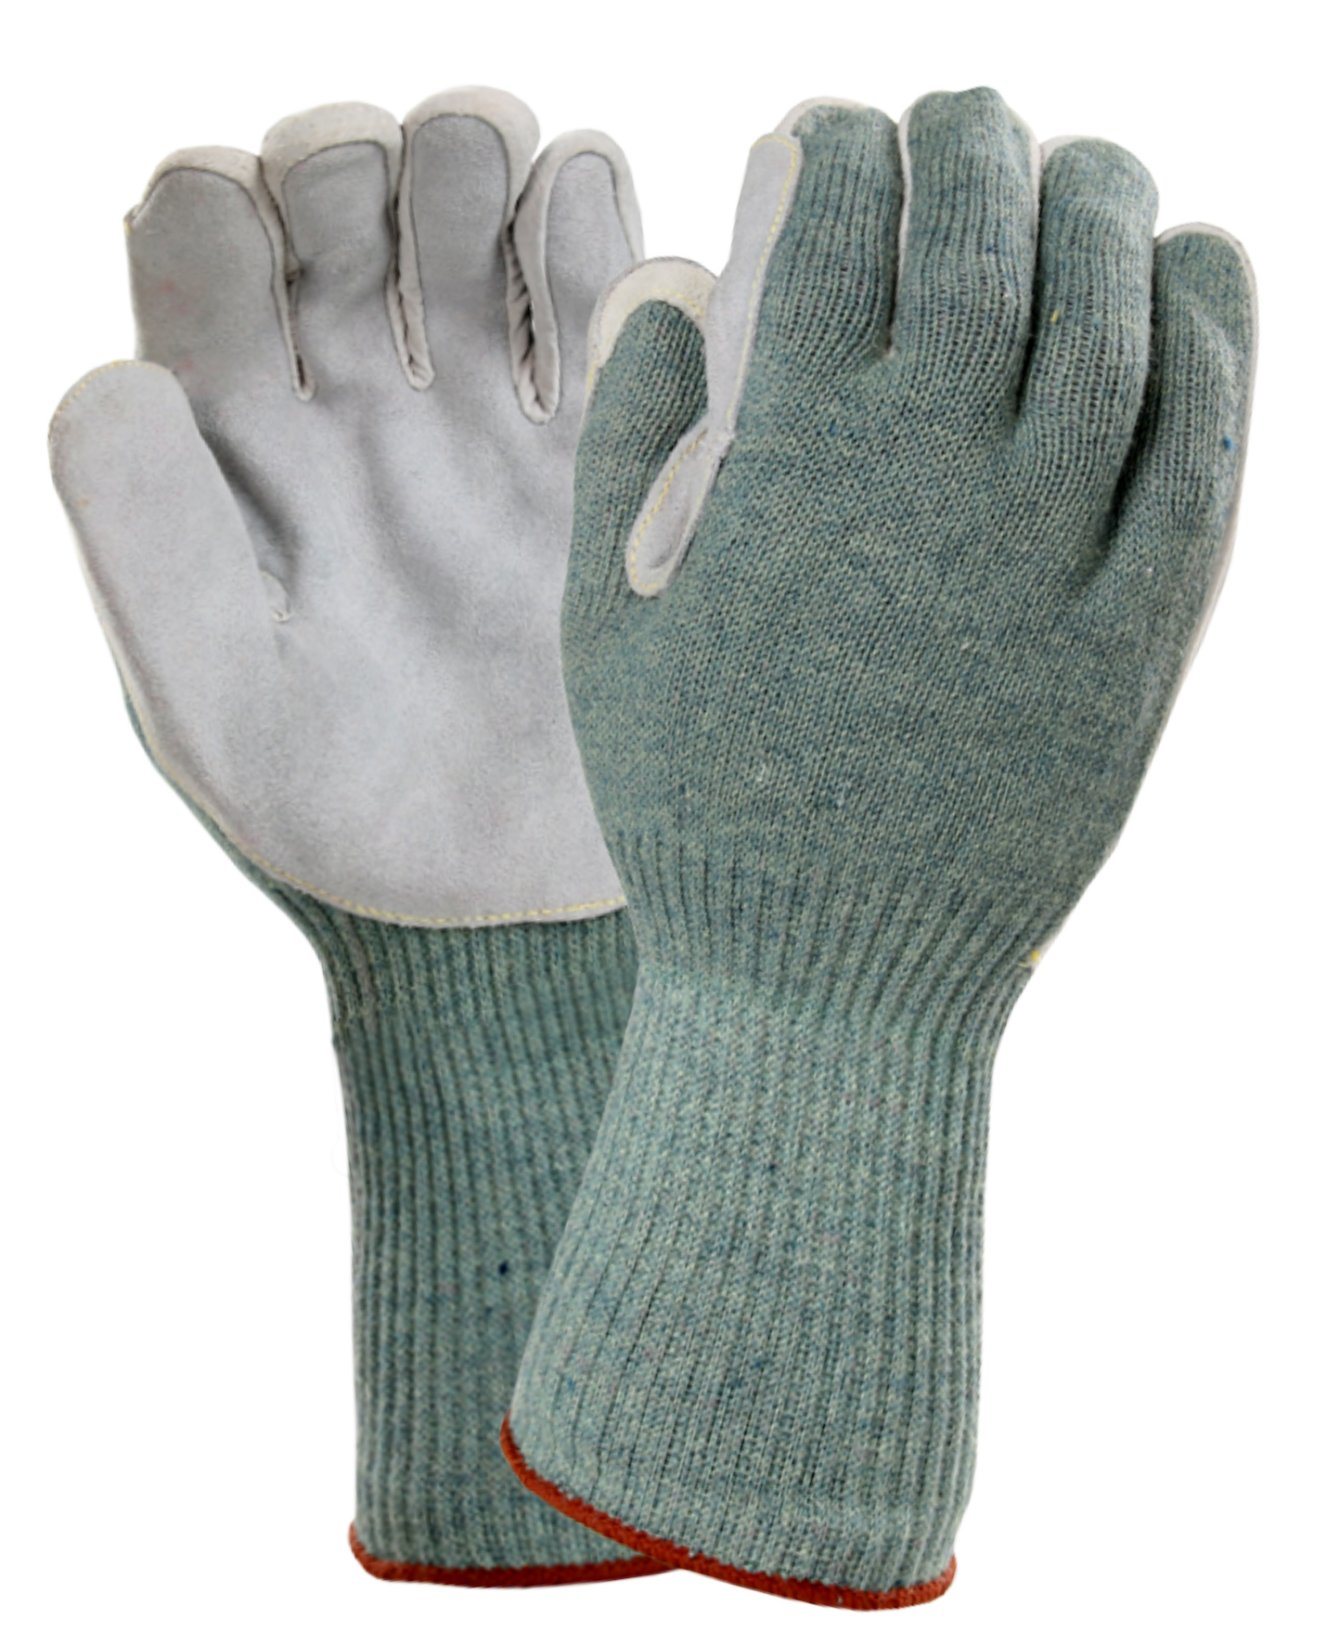 Long Cuff Leather Palm Anti-Cut Abrasion Resistant Work Gloves